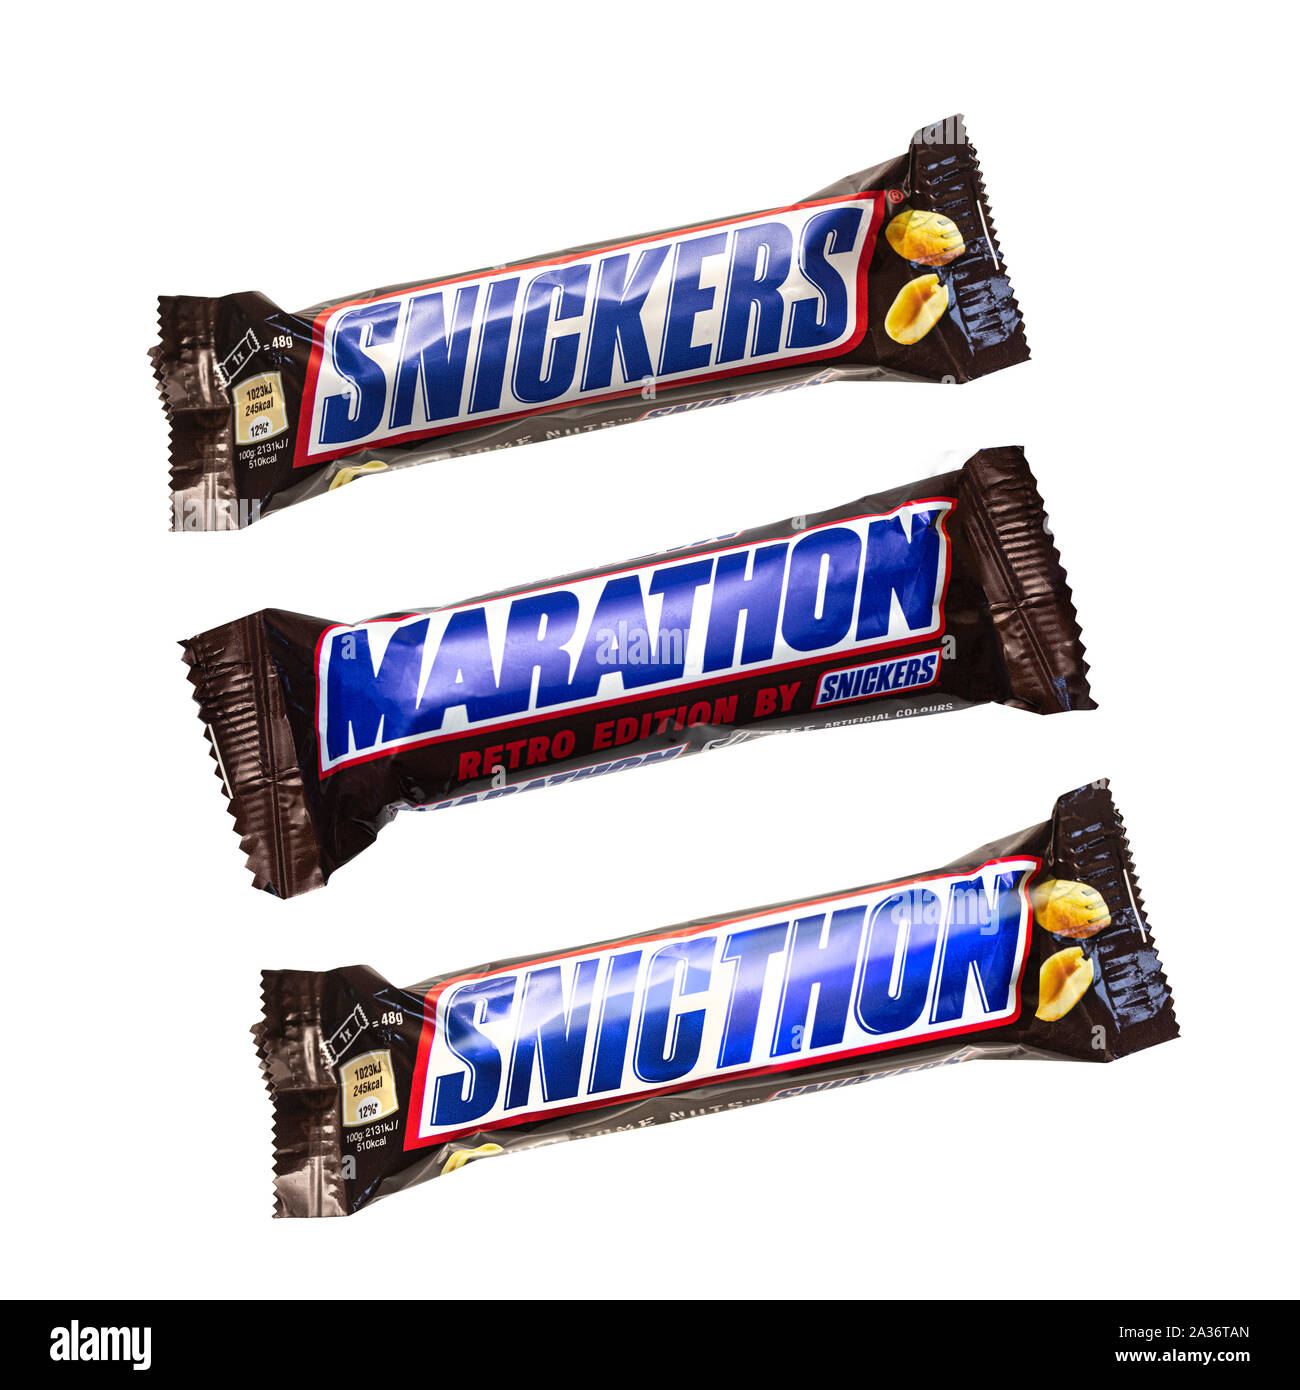 SWINDON, UK - SEPTEMBER 29, 2016: Snickers, Marathon and Snicthon chocolate  bars on a white background Stock Photo